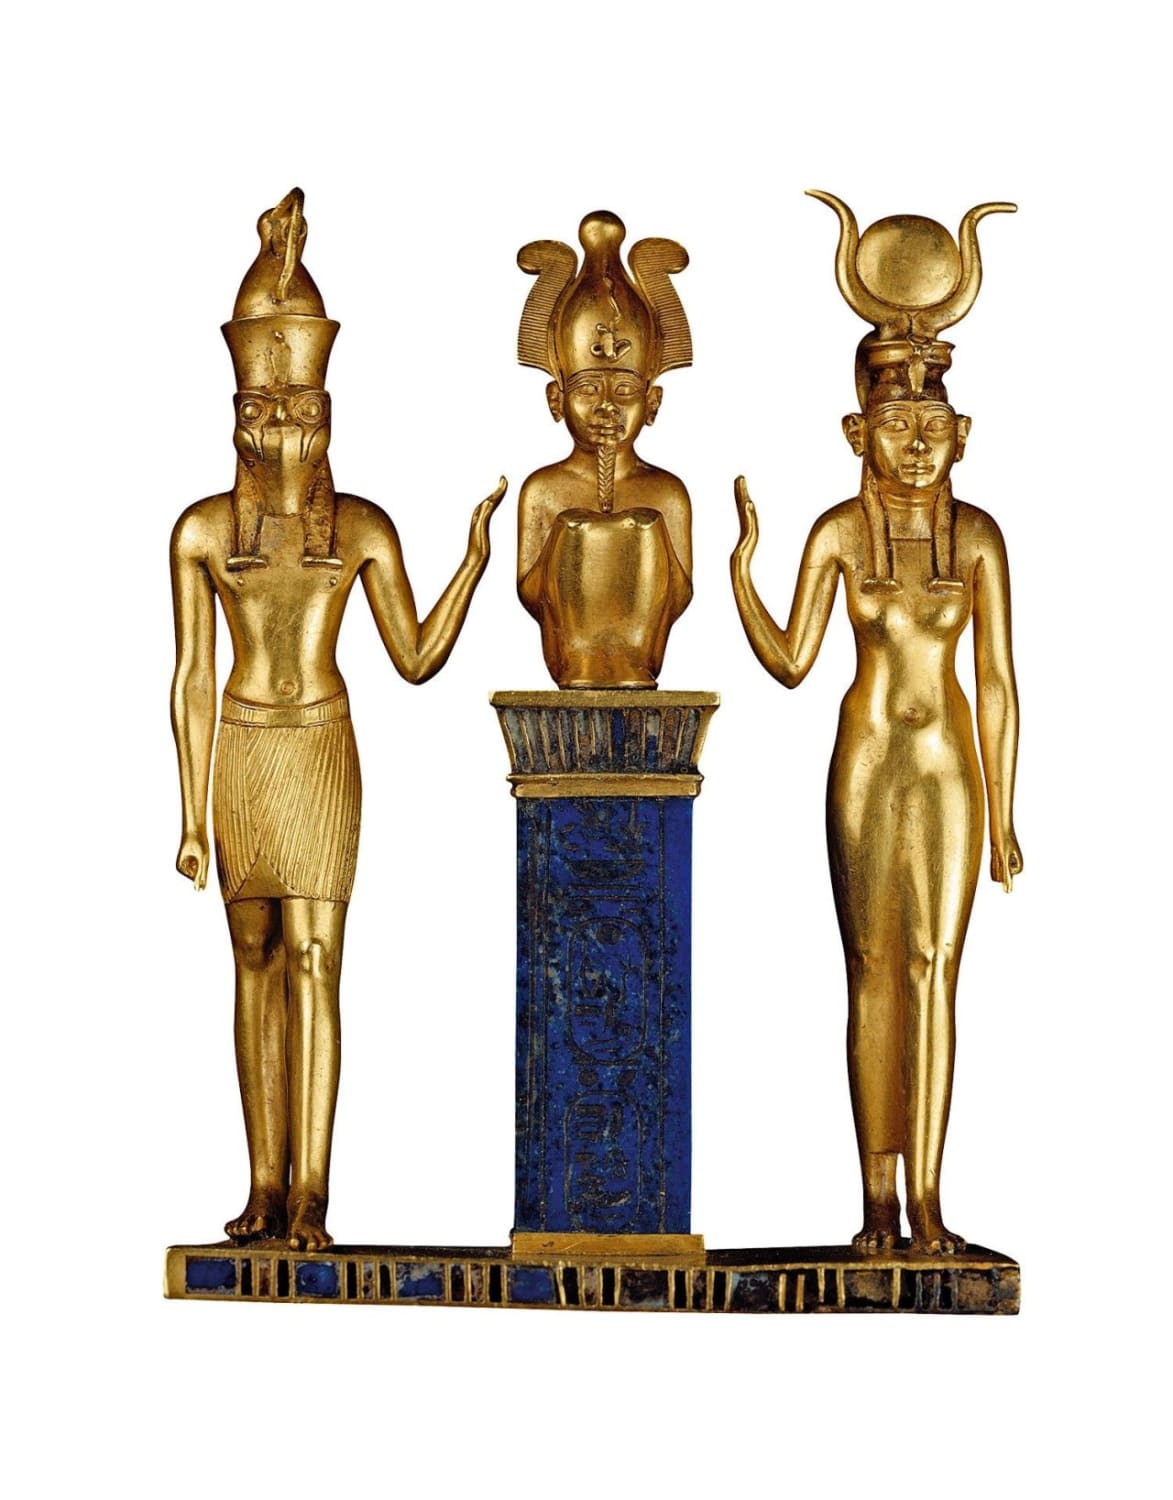 The Egyptian god Osiris seated between his wife Isis and their son Horus. Solid Gold and lapis lazuli pendant bearing the name of King Osorkon II. Third Intermediate Period, 22nd Dynasty, ca. 872-837 BC. Now in the Louvre, Paris.